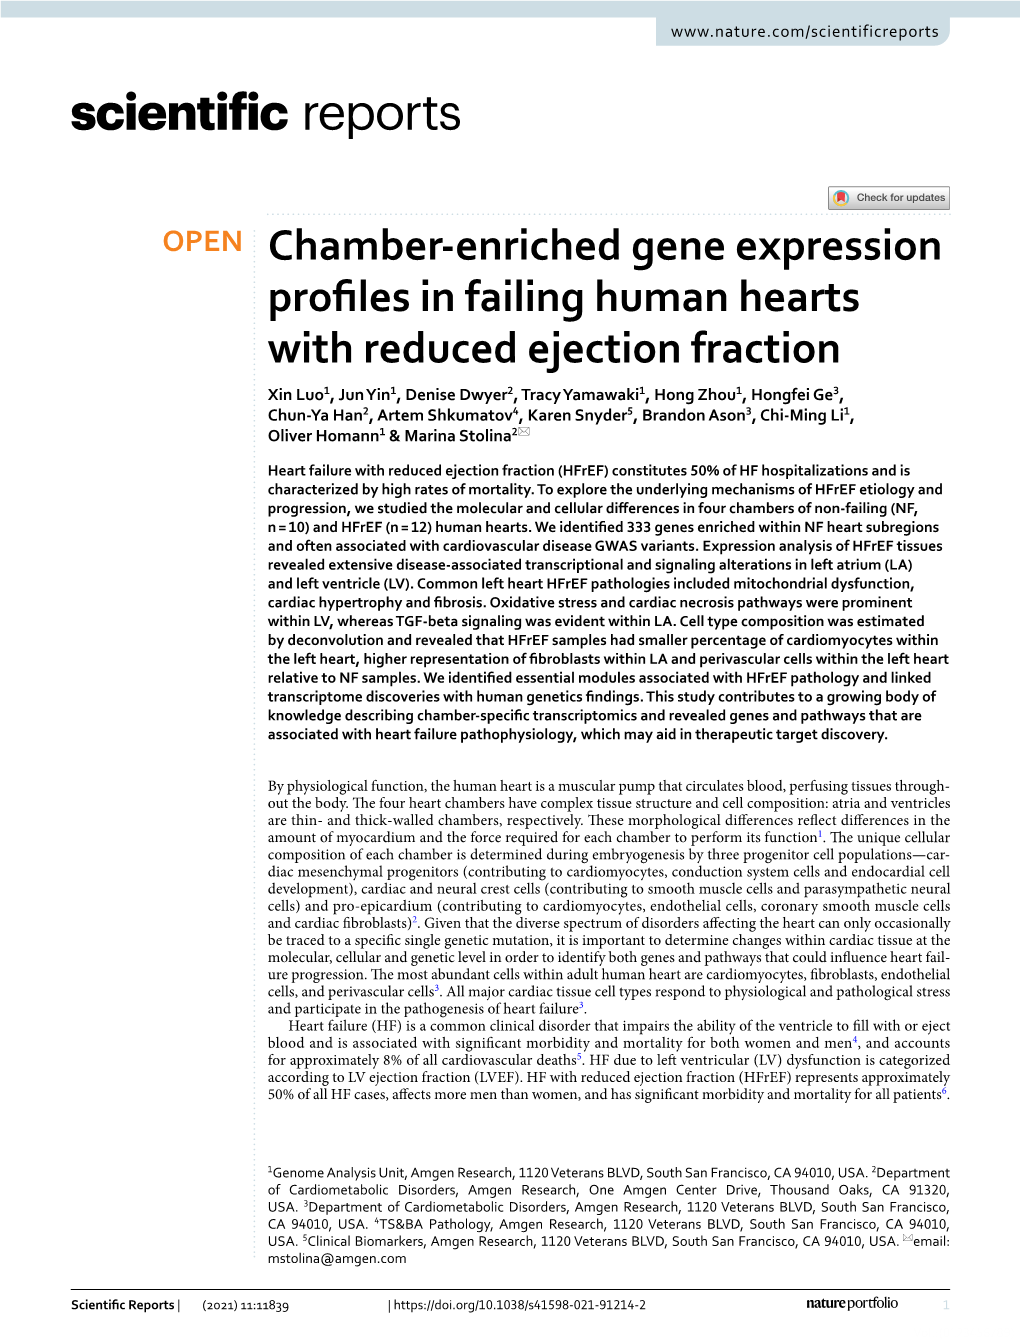 Chamber-Enriched Gene Expression Profiles in Failing Human Hearts with Reduced Ejection Fraction